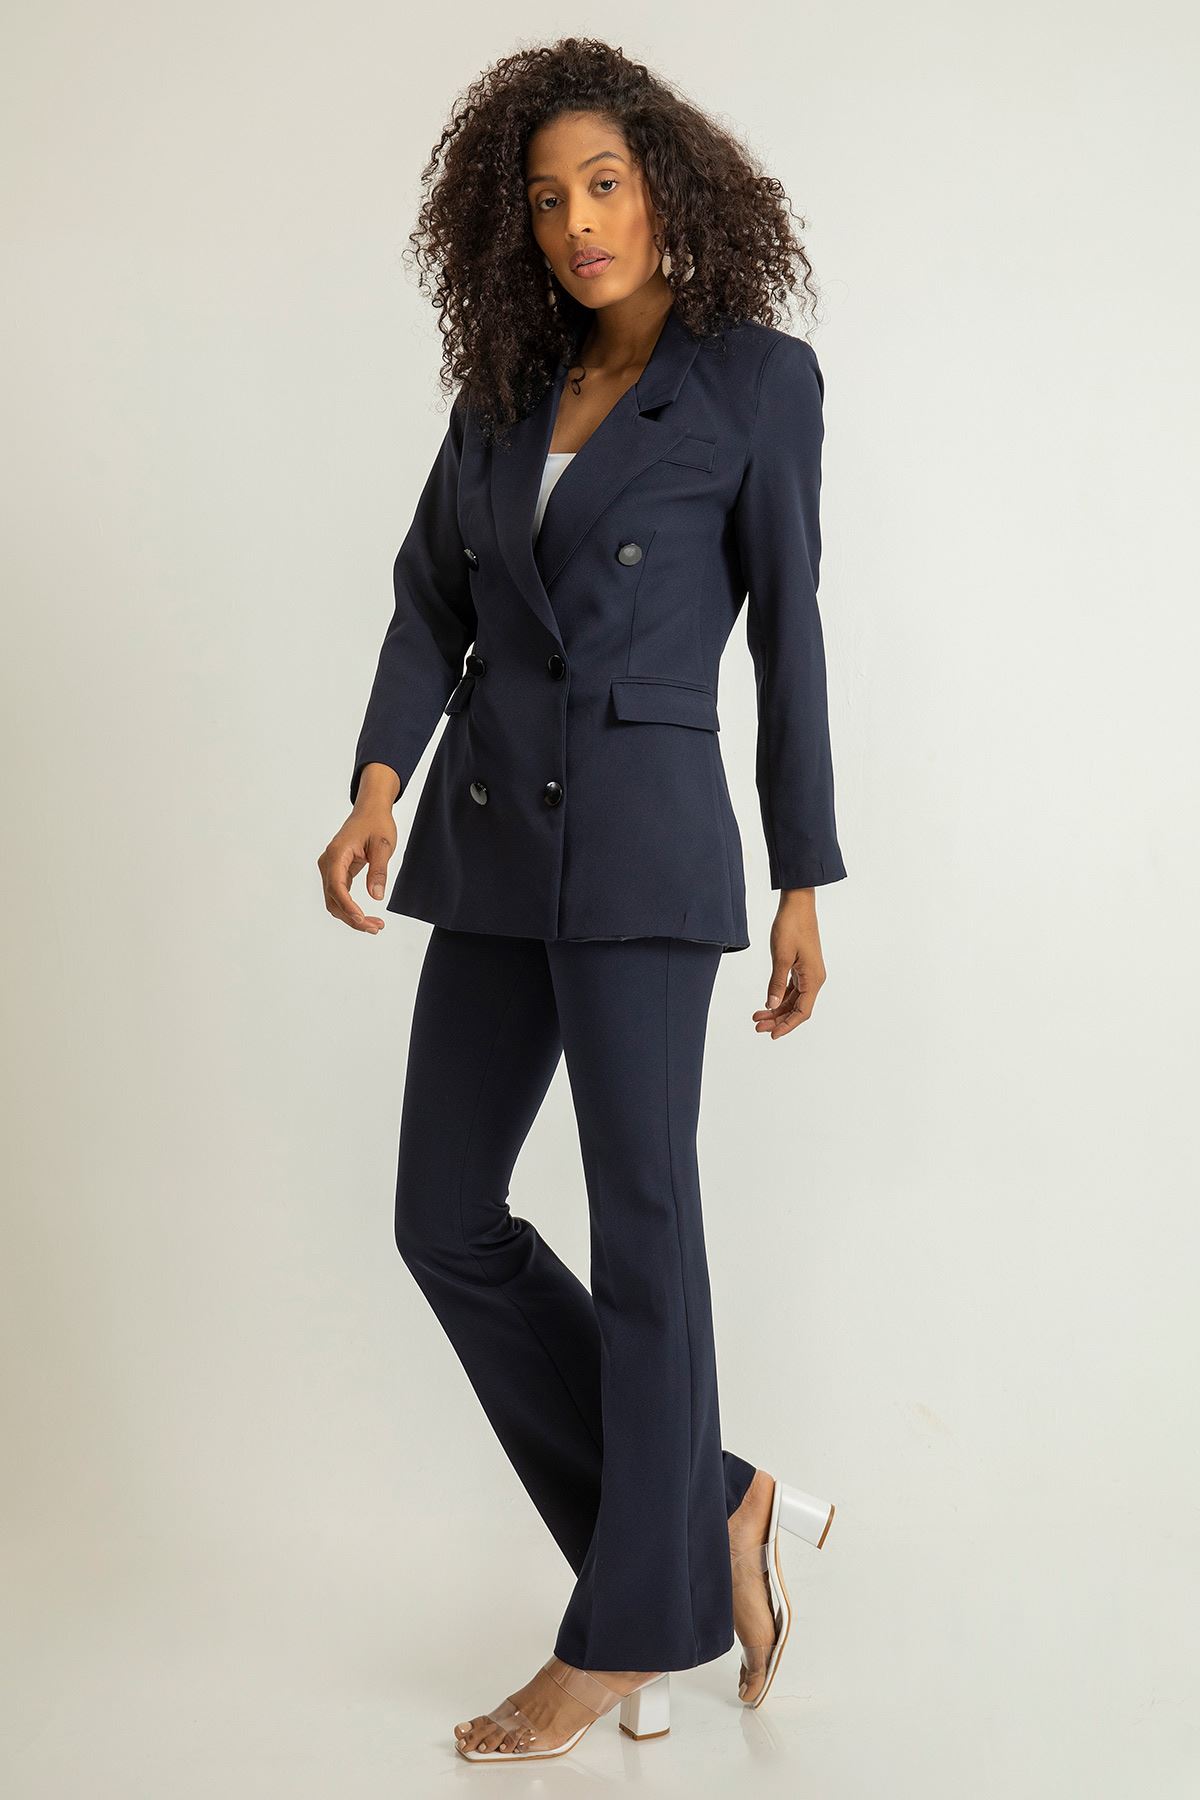 Polyester Fabric Revere Collar Below Hip Classical Double Button Women Jacket - Navy Blue 